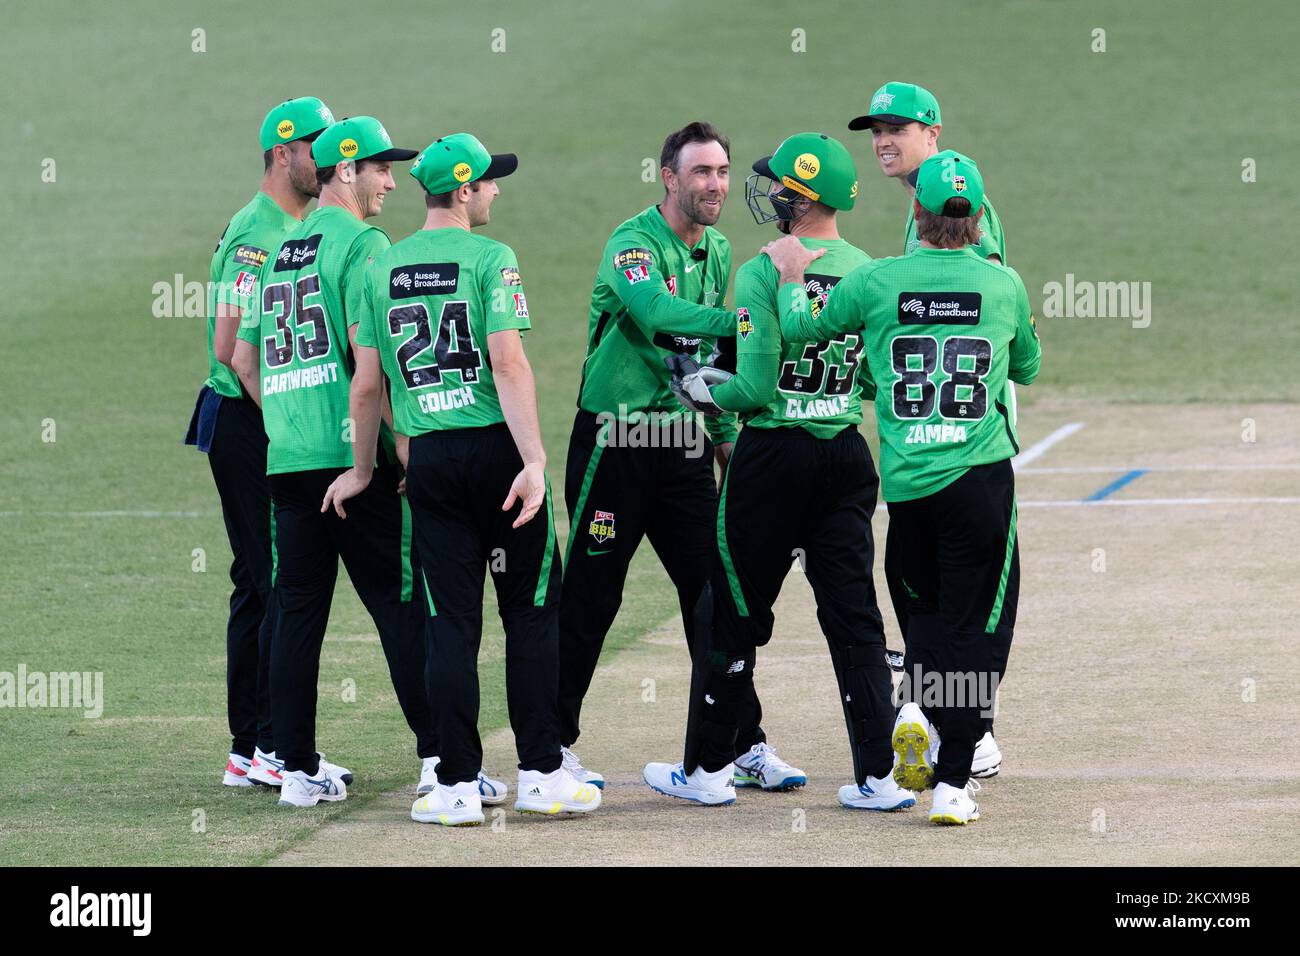 Glenn Maxwell of Stars celebrate after taking the wicket of Sam Whiteman of Thunders during the match between Sydney Thunder and Melbourne Stars at Sydney Showground Stadium, on December 12, 2021, in Sydney, Australia. (Editorial use only) Stock Photo